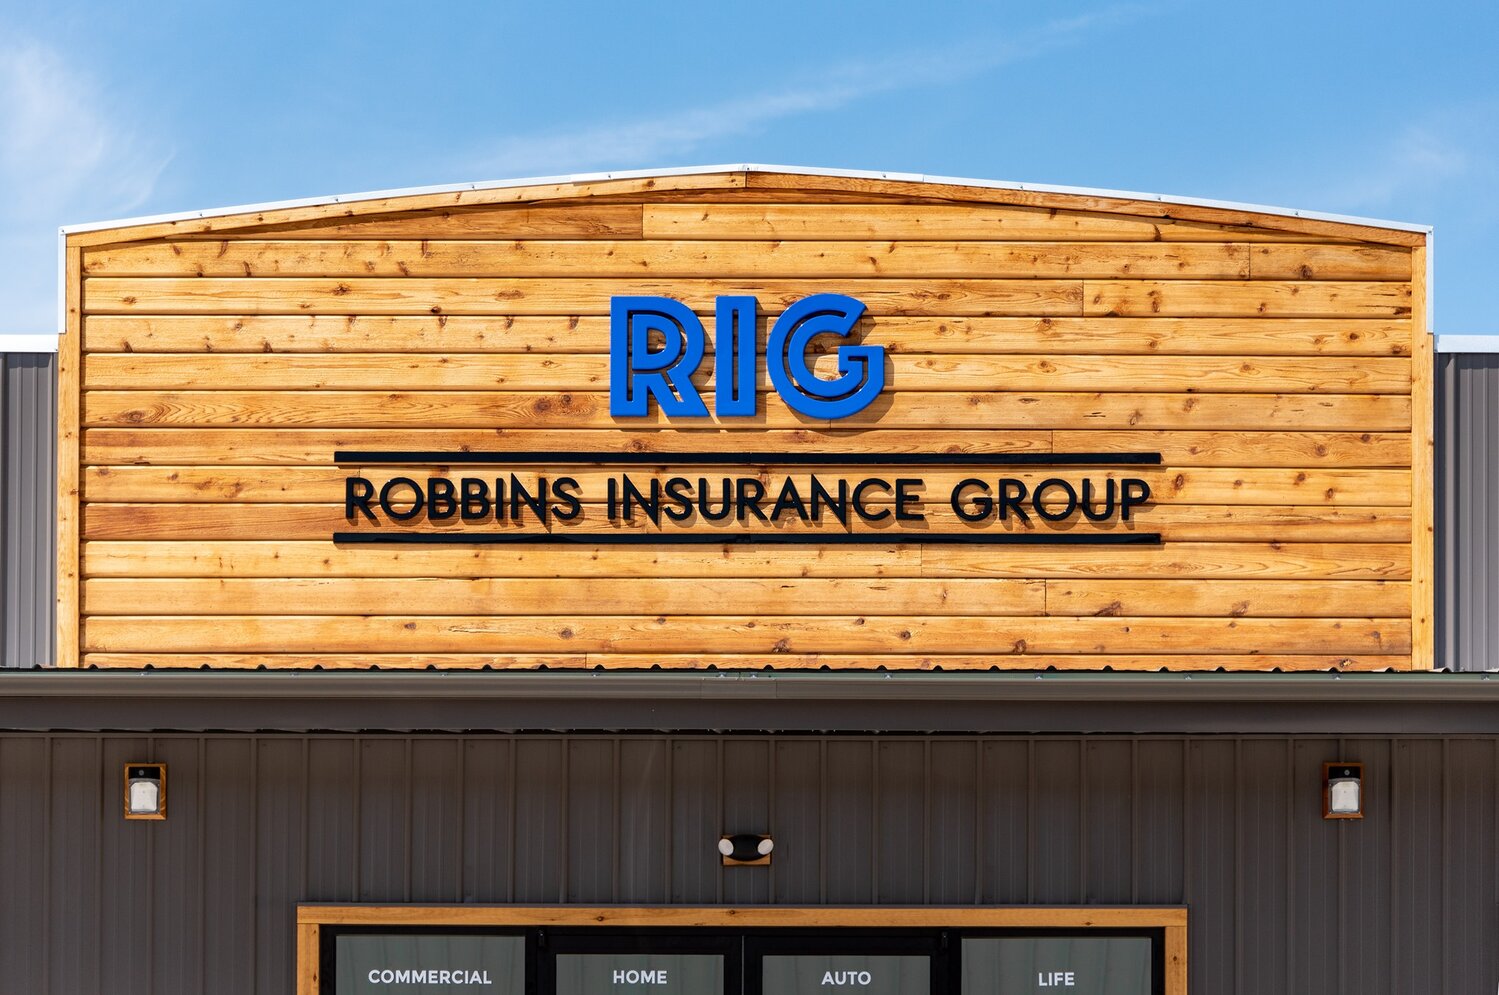 Robbins Insurance Group was founded in 2018.